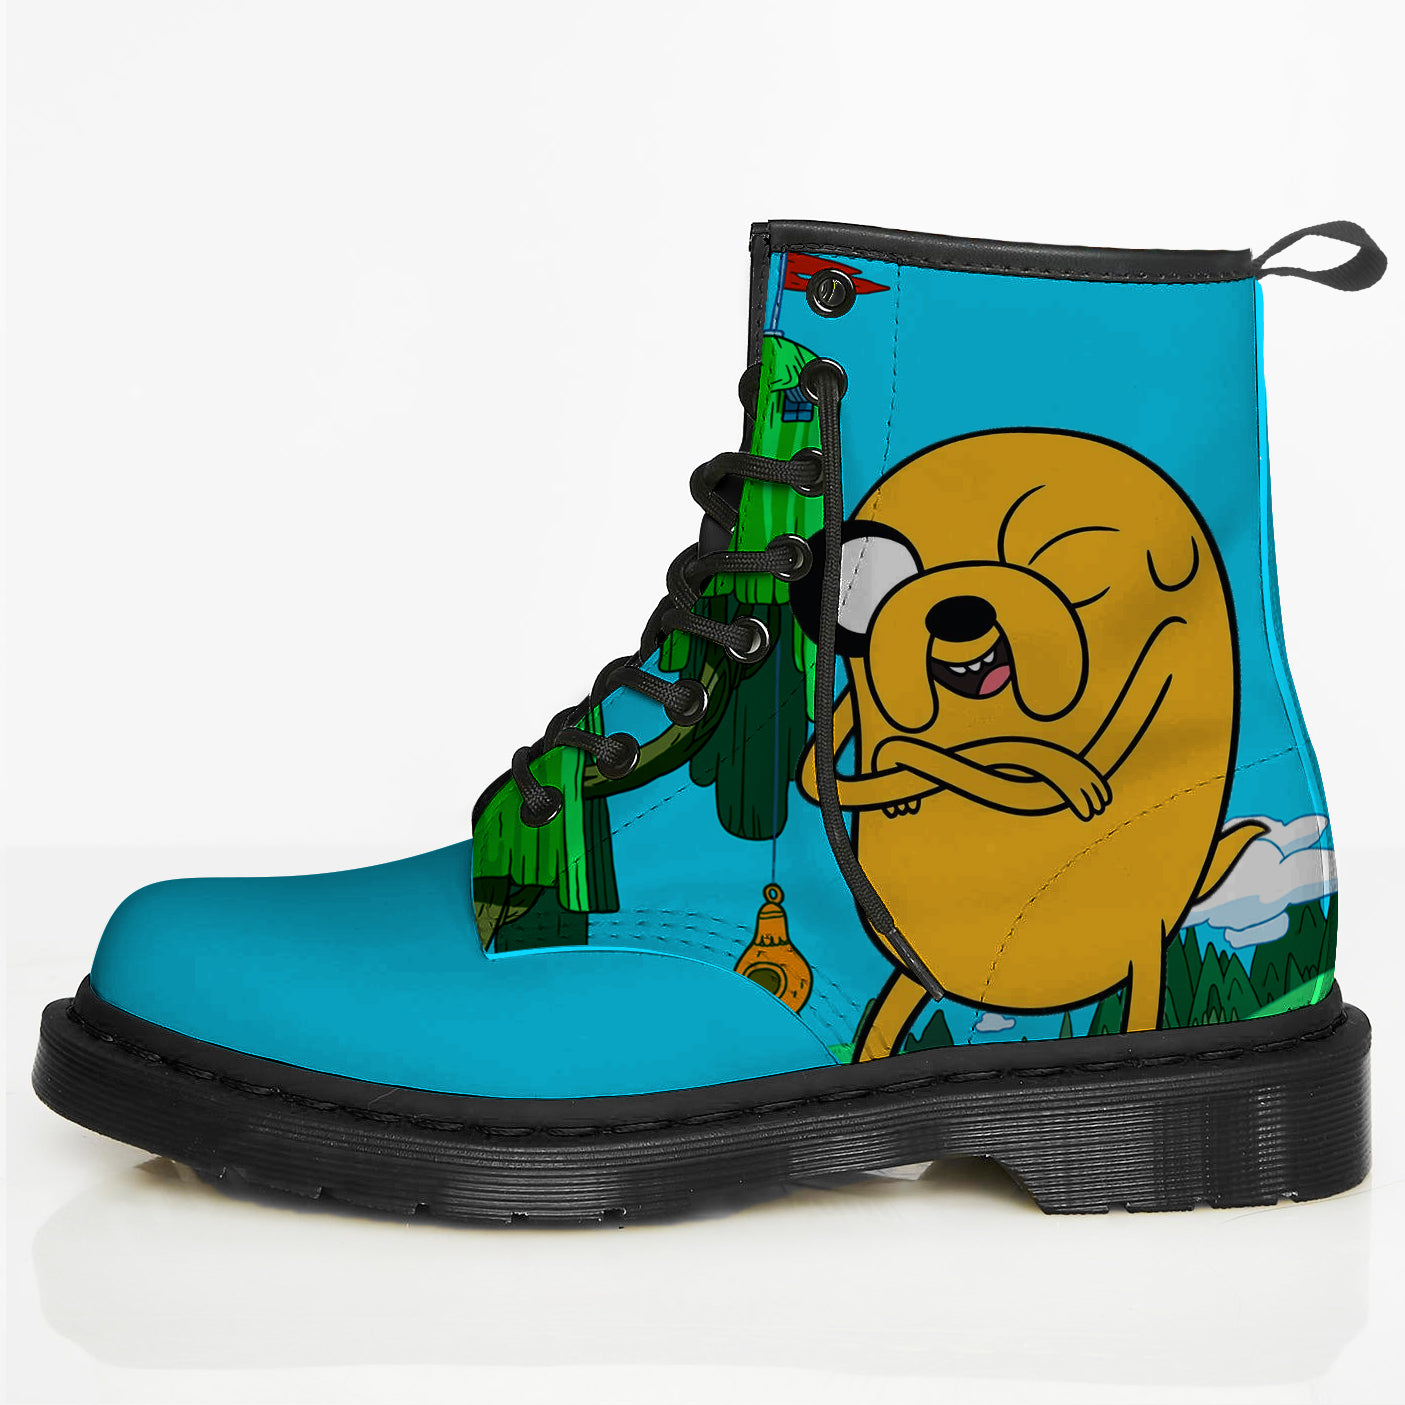 Adventure Time Jake the Dog Boots